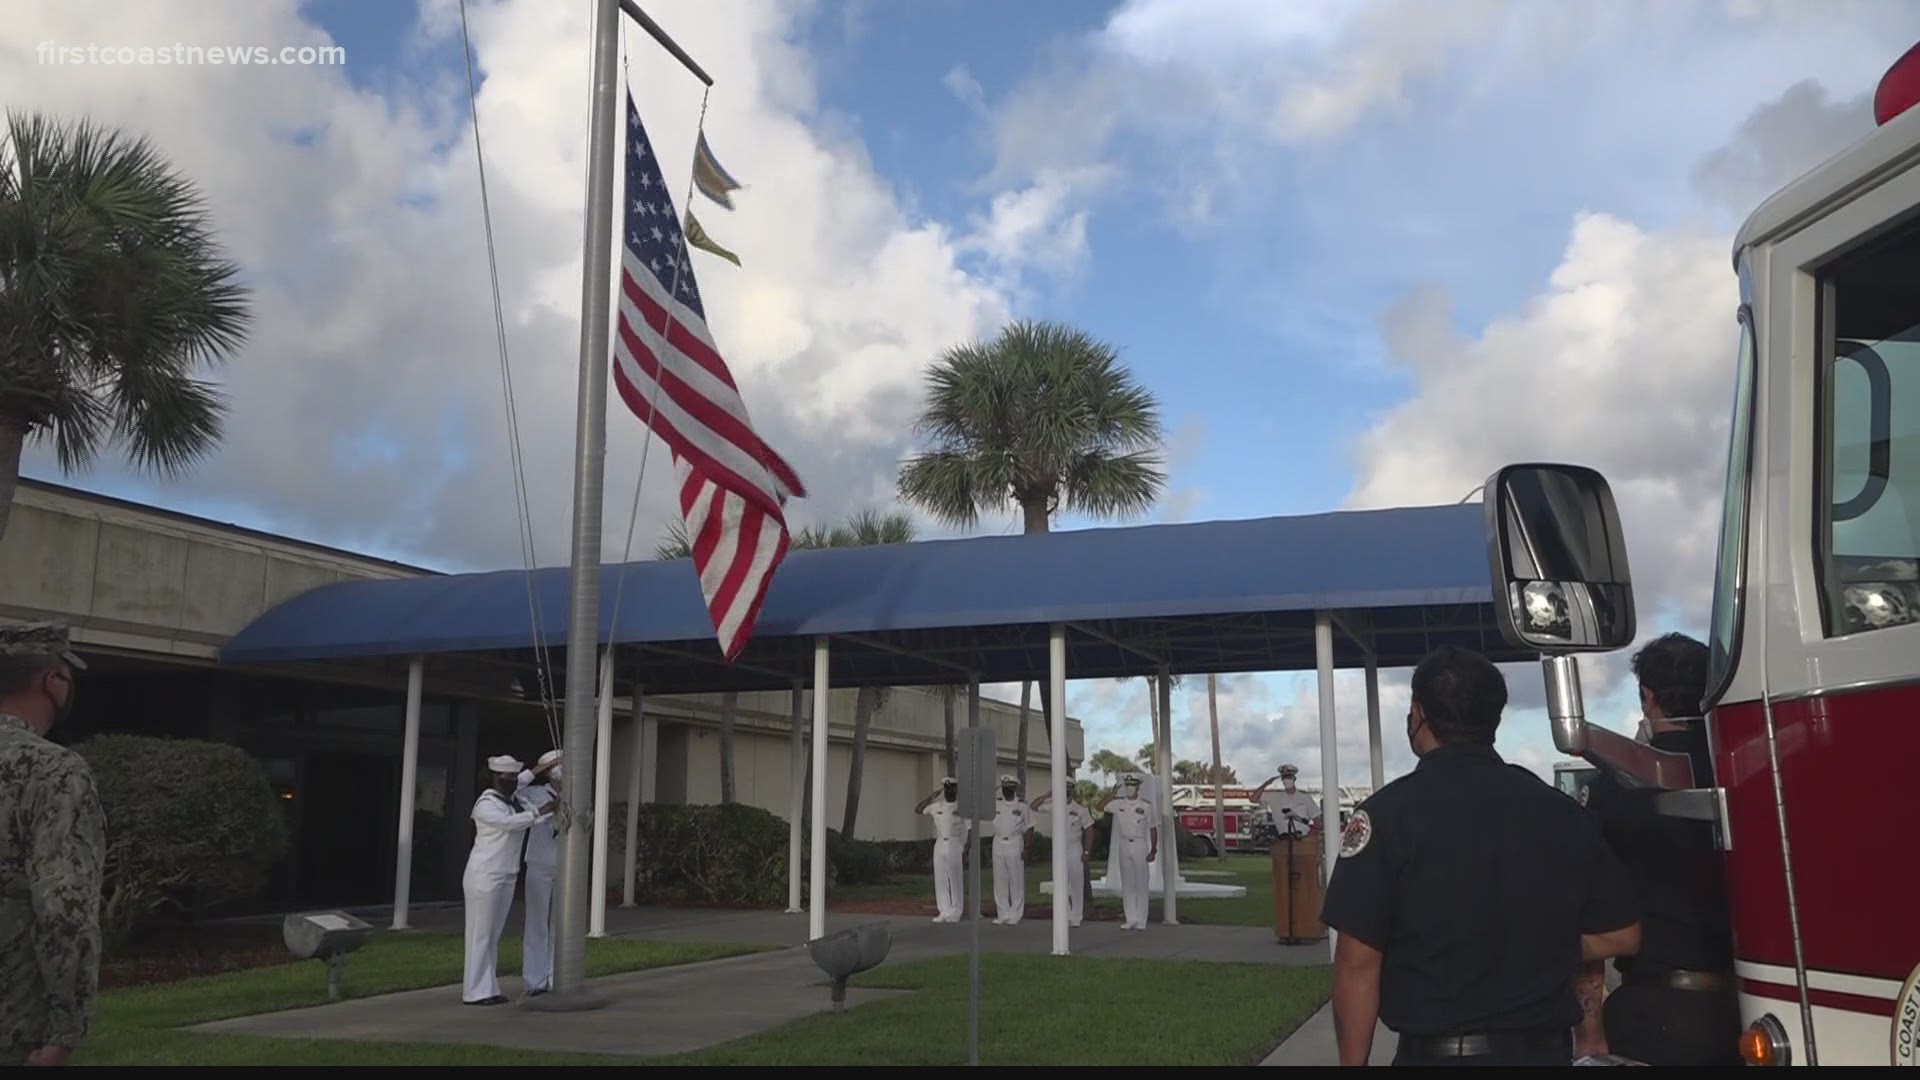 Across the First Coast and across the nation, people are holding memorial ceremonies to remember the nearly 3,000 people killed in the terror attacks on 9/11.